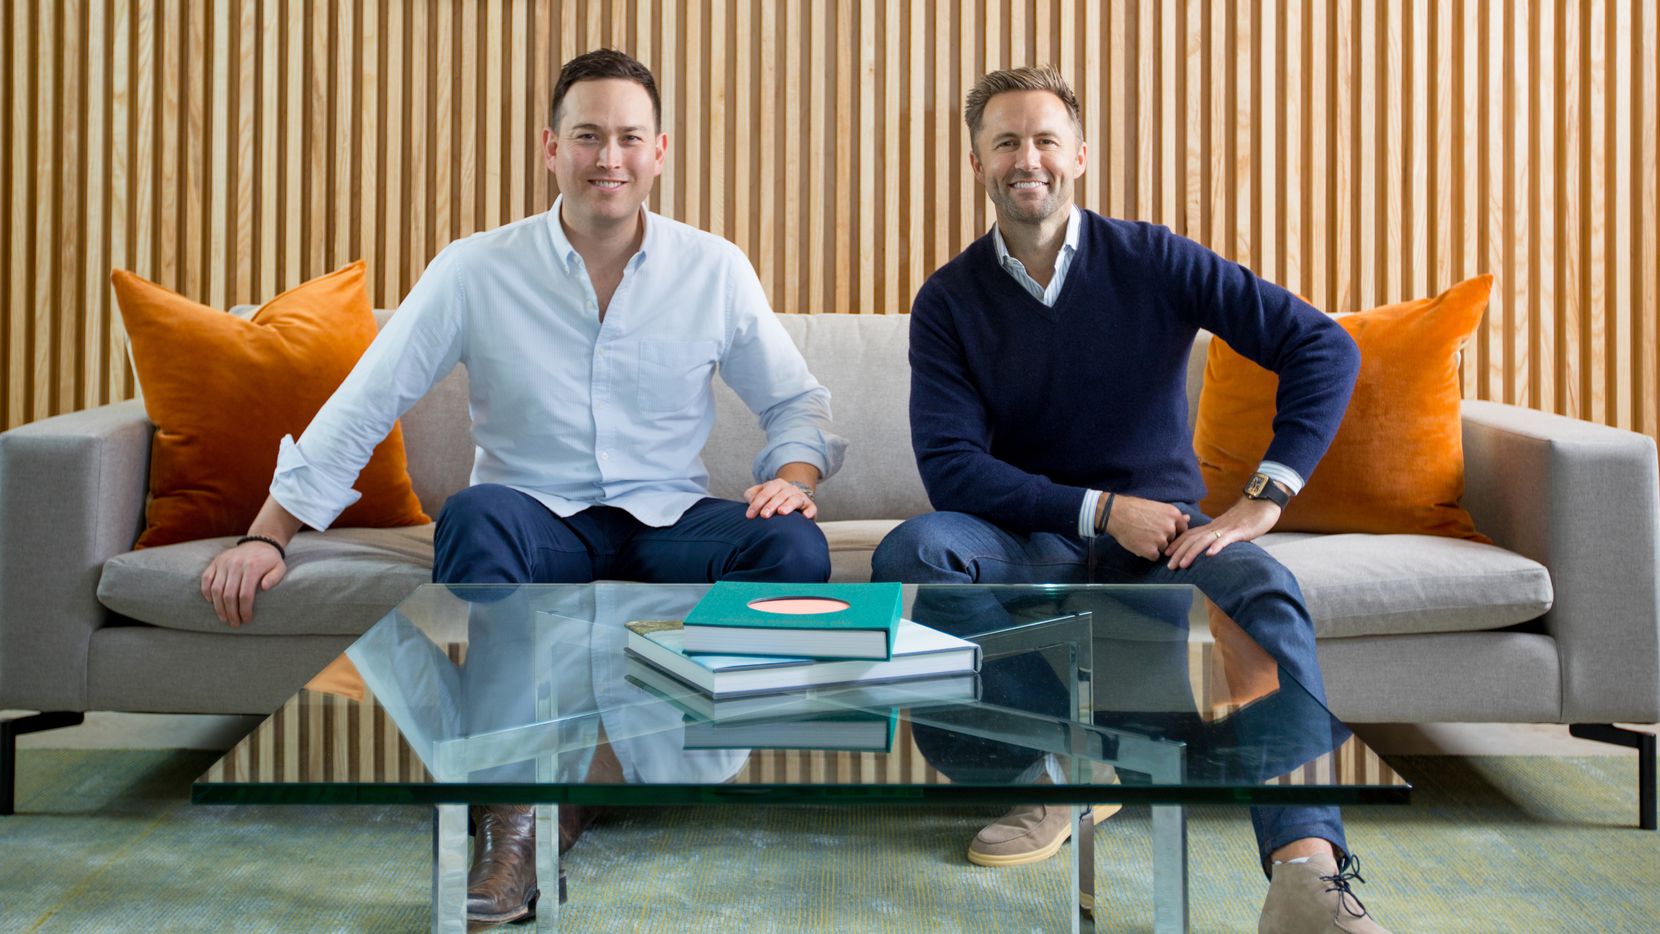 Jonathan Abelmann (left) and Melbourne O'Banion are co-founders of Dallas-based life insurance startup Bestow.